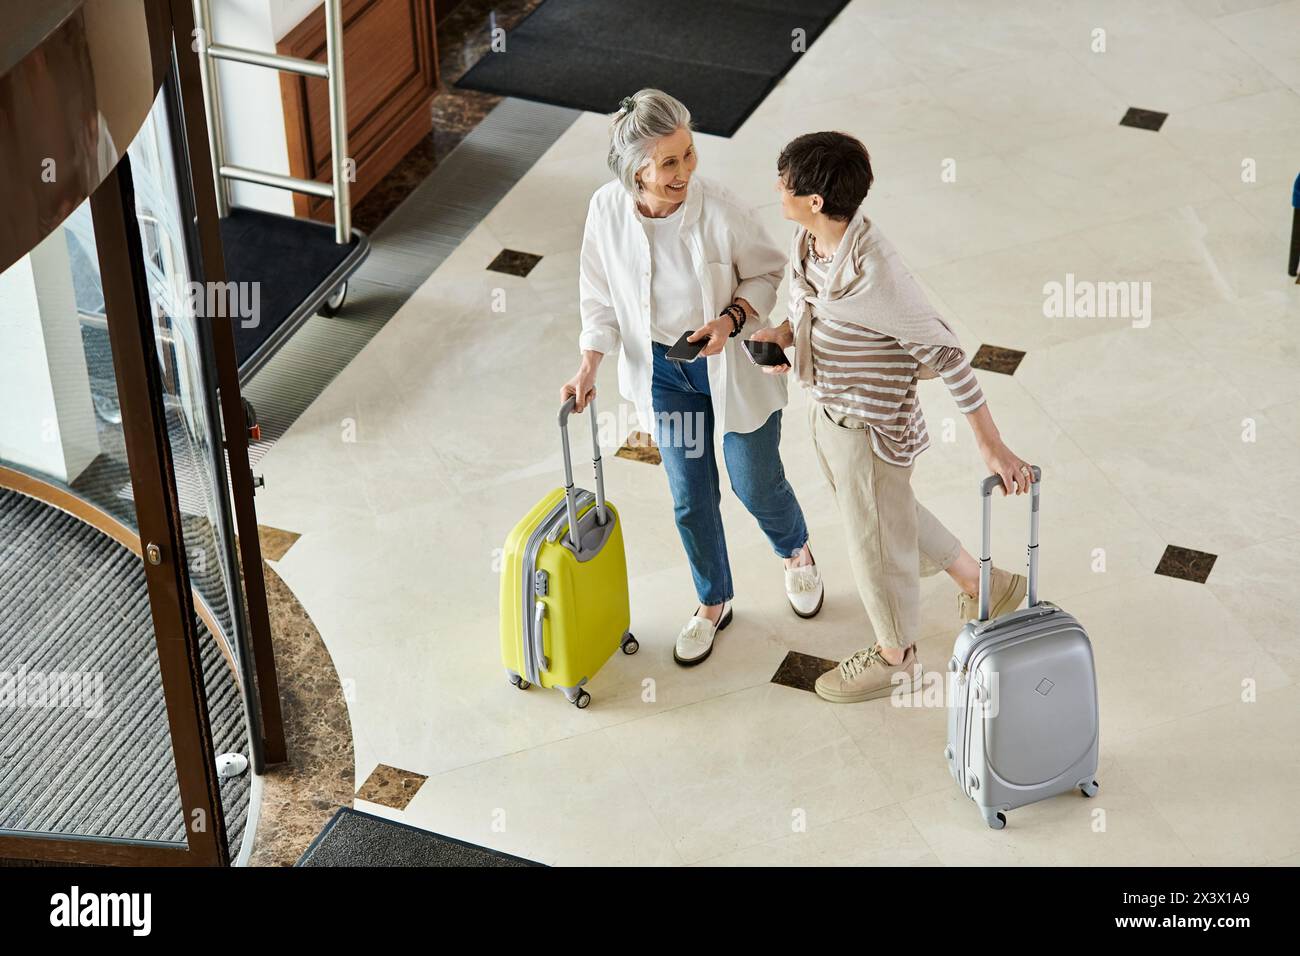 Loving senior lesbian couple standing with their luggage in a hotel. Stock Photo